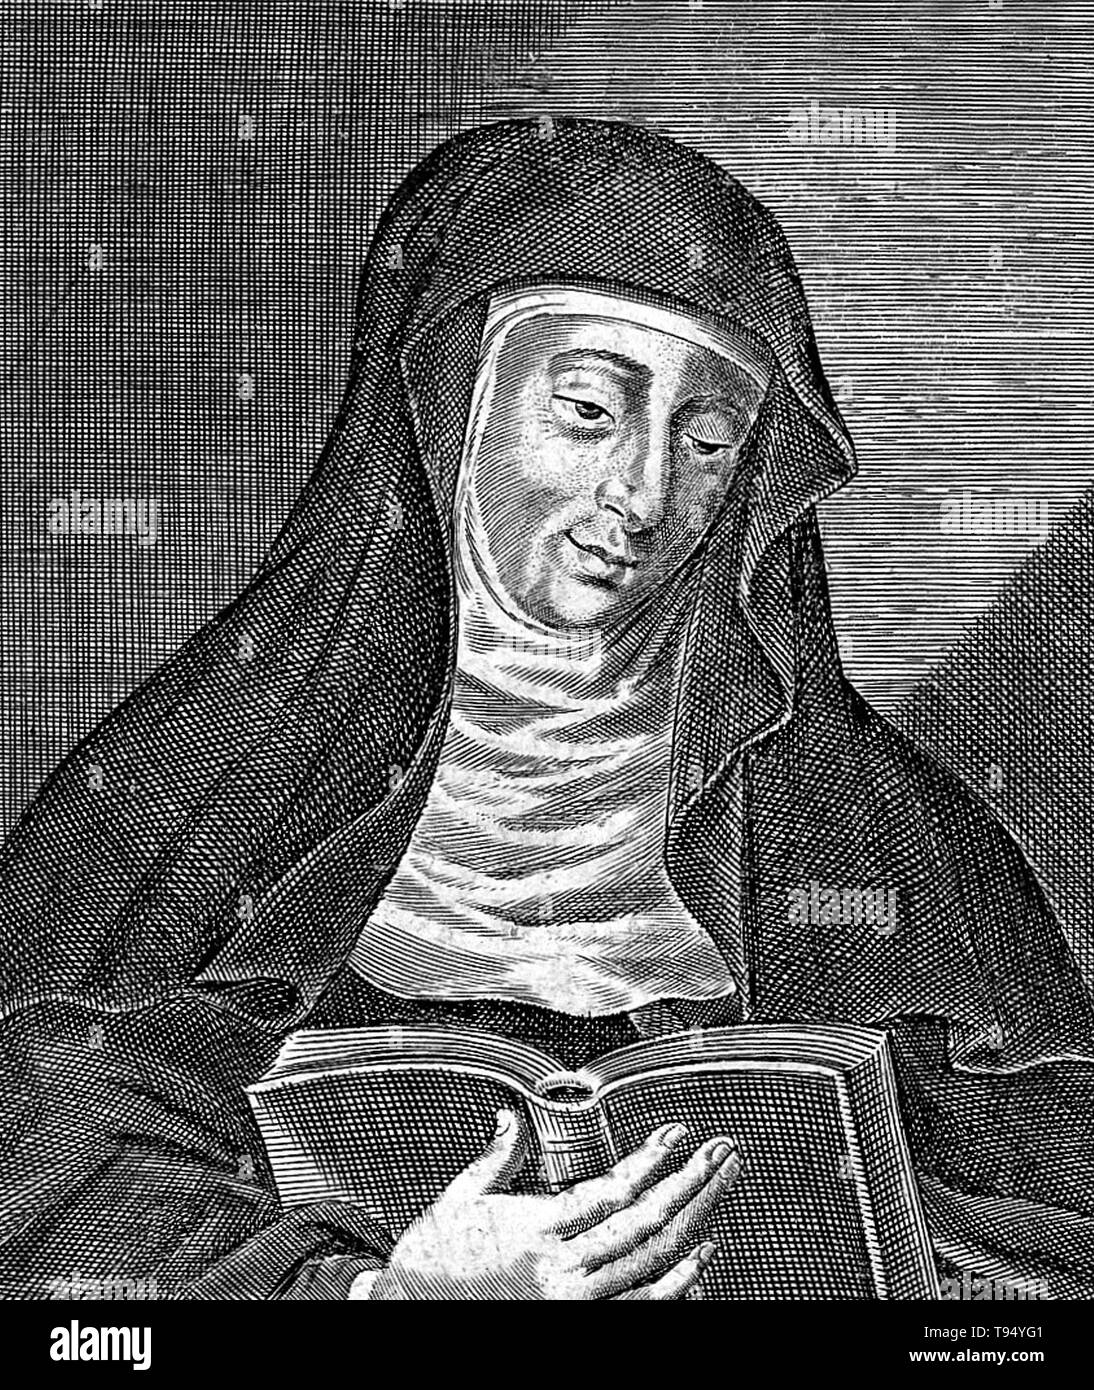 Hildegard of Bingen (1098 - September 17, 1179) was a German Benedictine abbess, writer, composer, philosopher, Christian mystic, visionary, and polymath. She is considered to be the founder of scientific natural history in Germany. One of her works as a composer, the Ordo Virtutum, is an early example of liturgical drama and arguably the oldest surviving morality play. Stock Photo